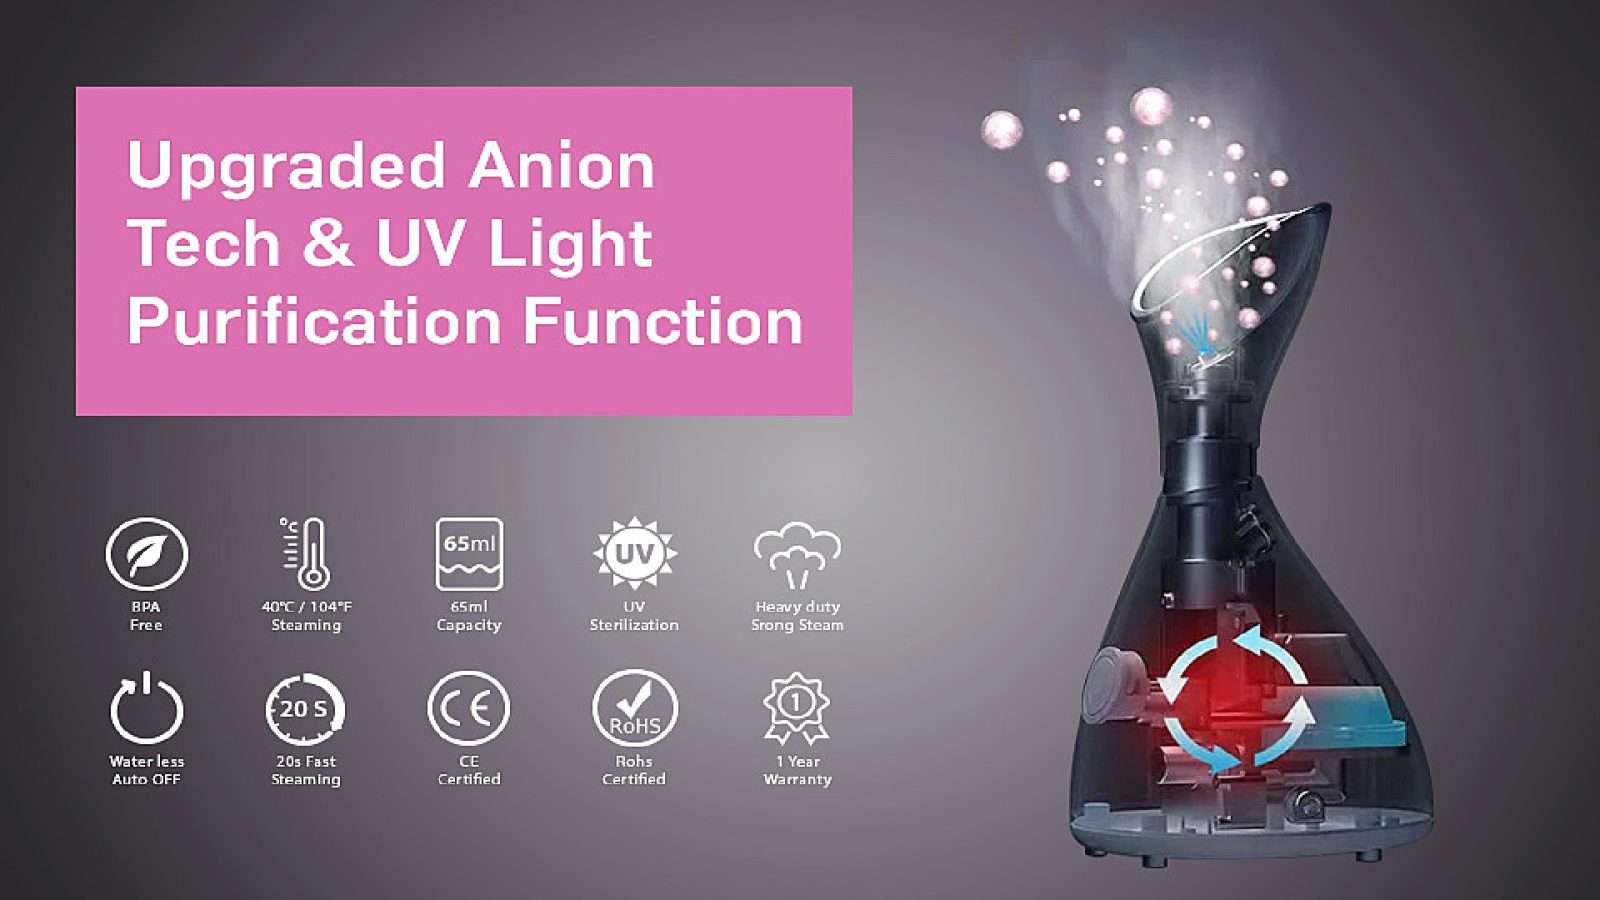 facial steamer with upgraded anion tech and uv light purification function